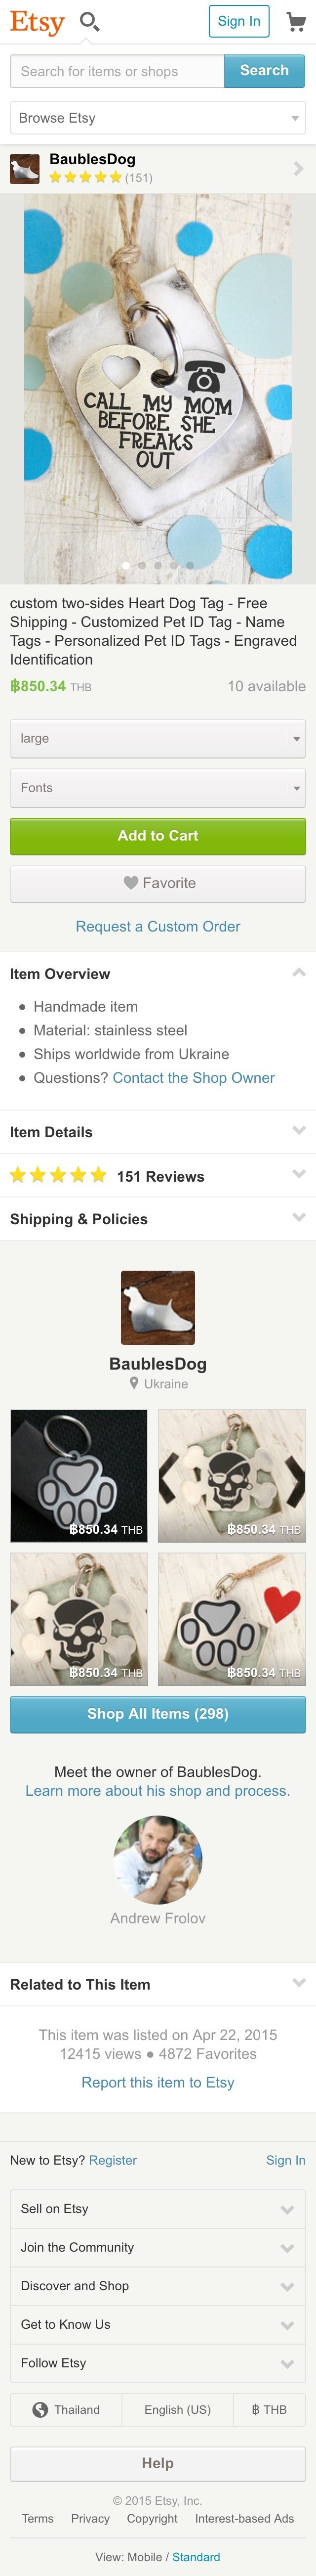 Etsy mobile product page design example